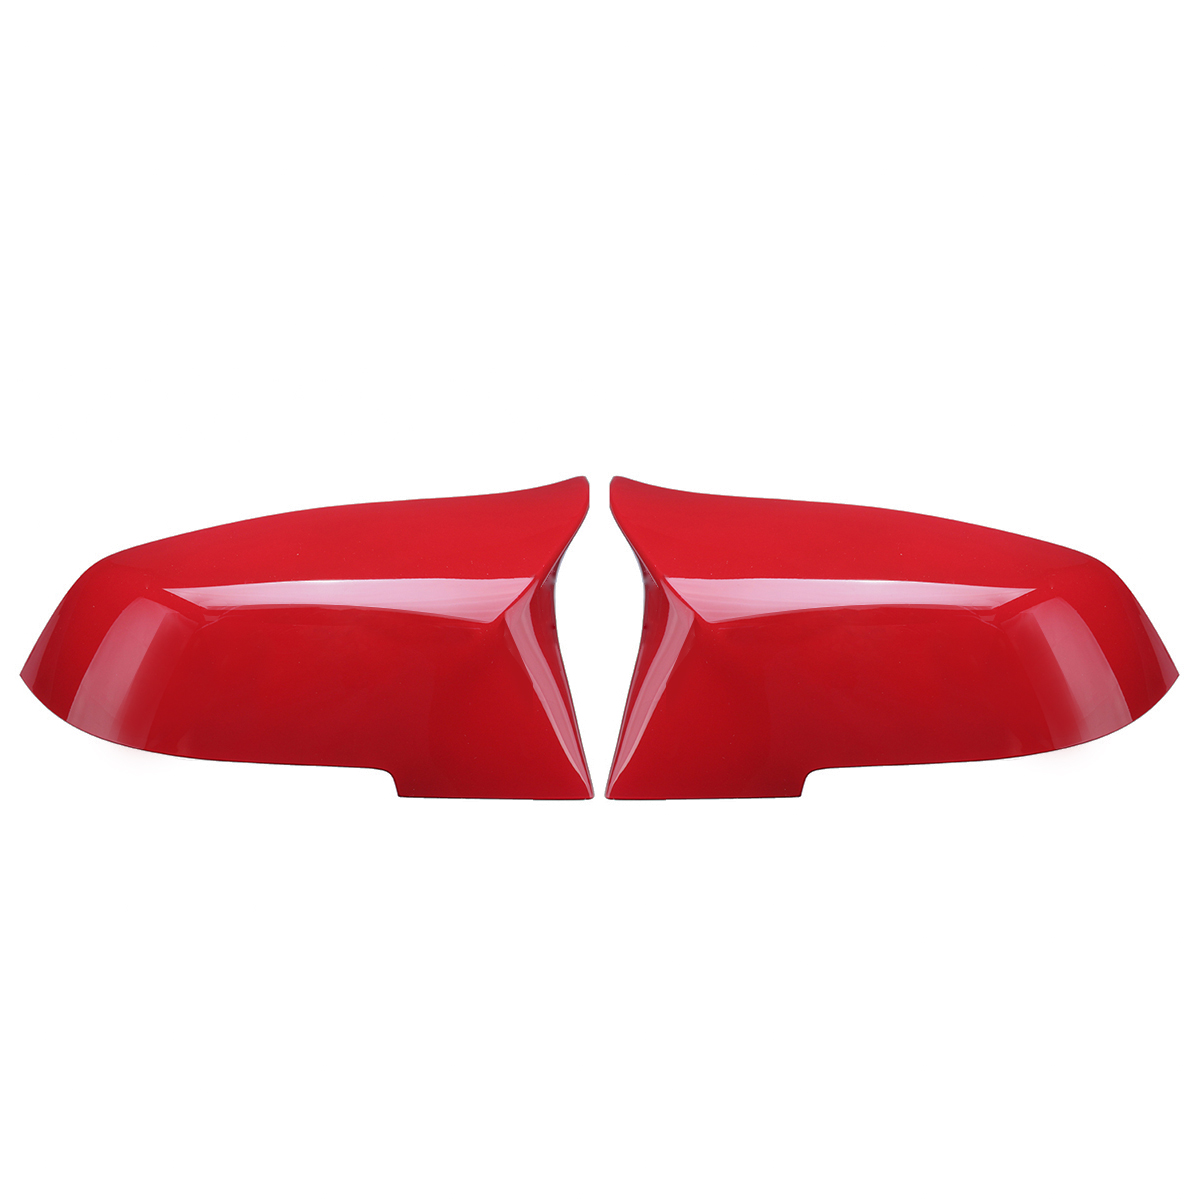 1Pair Red ABS Rearview Mirror Cover for BMW 1/2/3/4/X/ M Series F20 F21 F22 F23